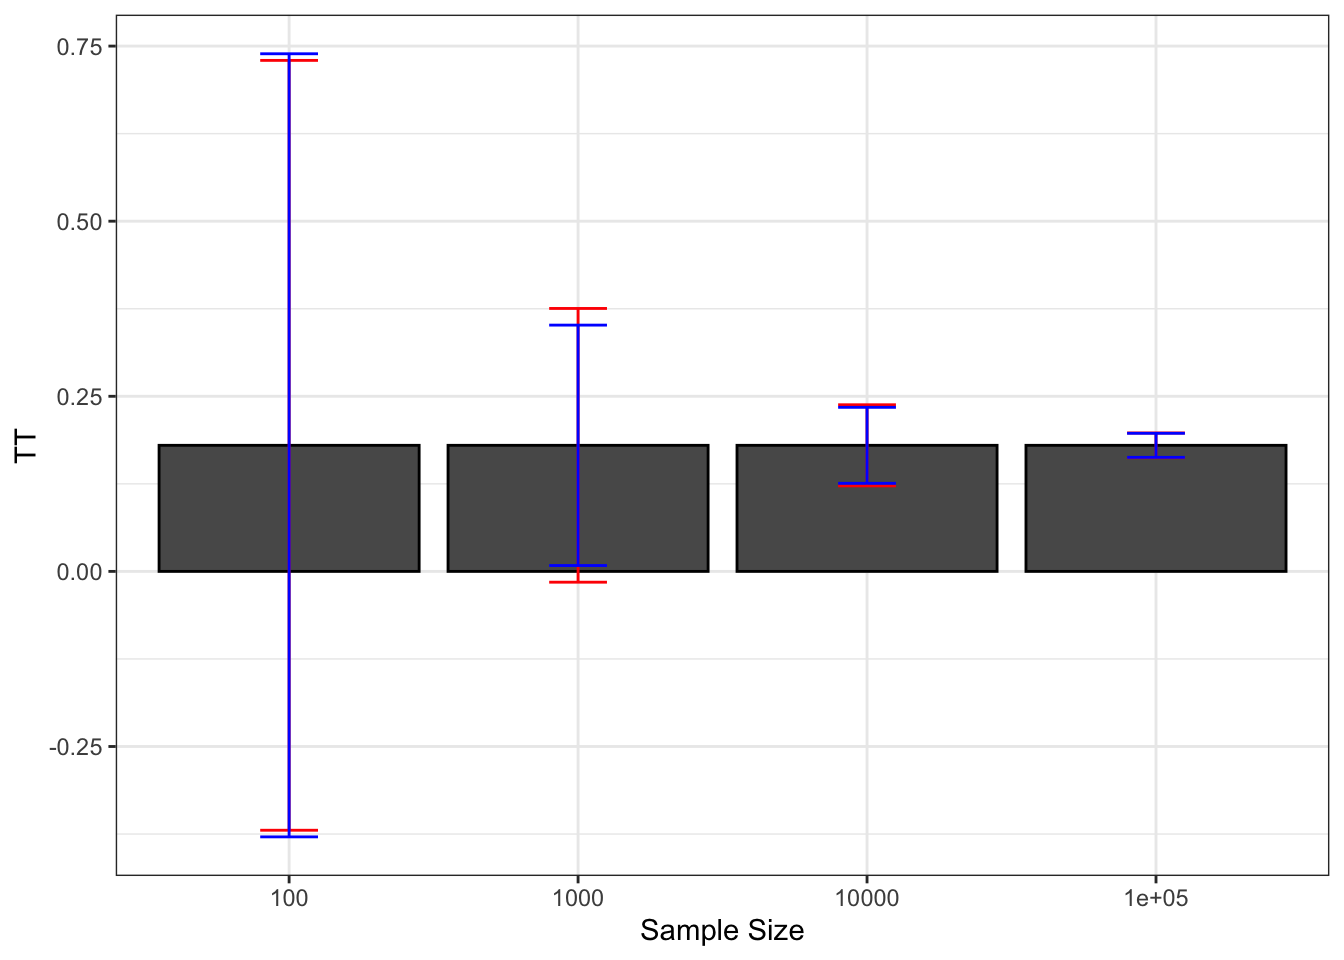 Average estimates of sampling noise using Randomization Inference over replications of samples of different sizes (true sampling noise in red)